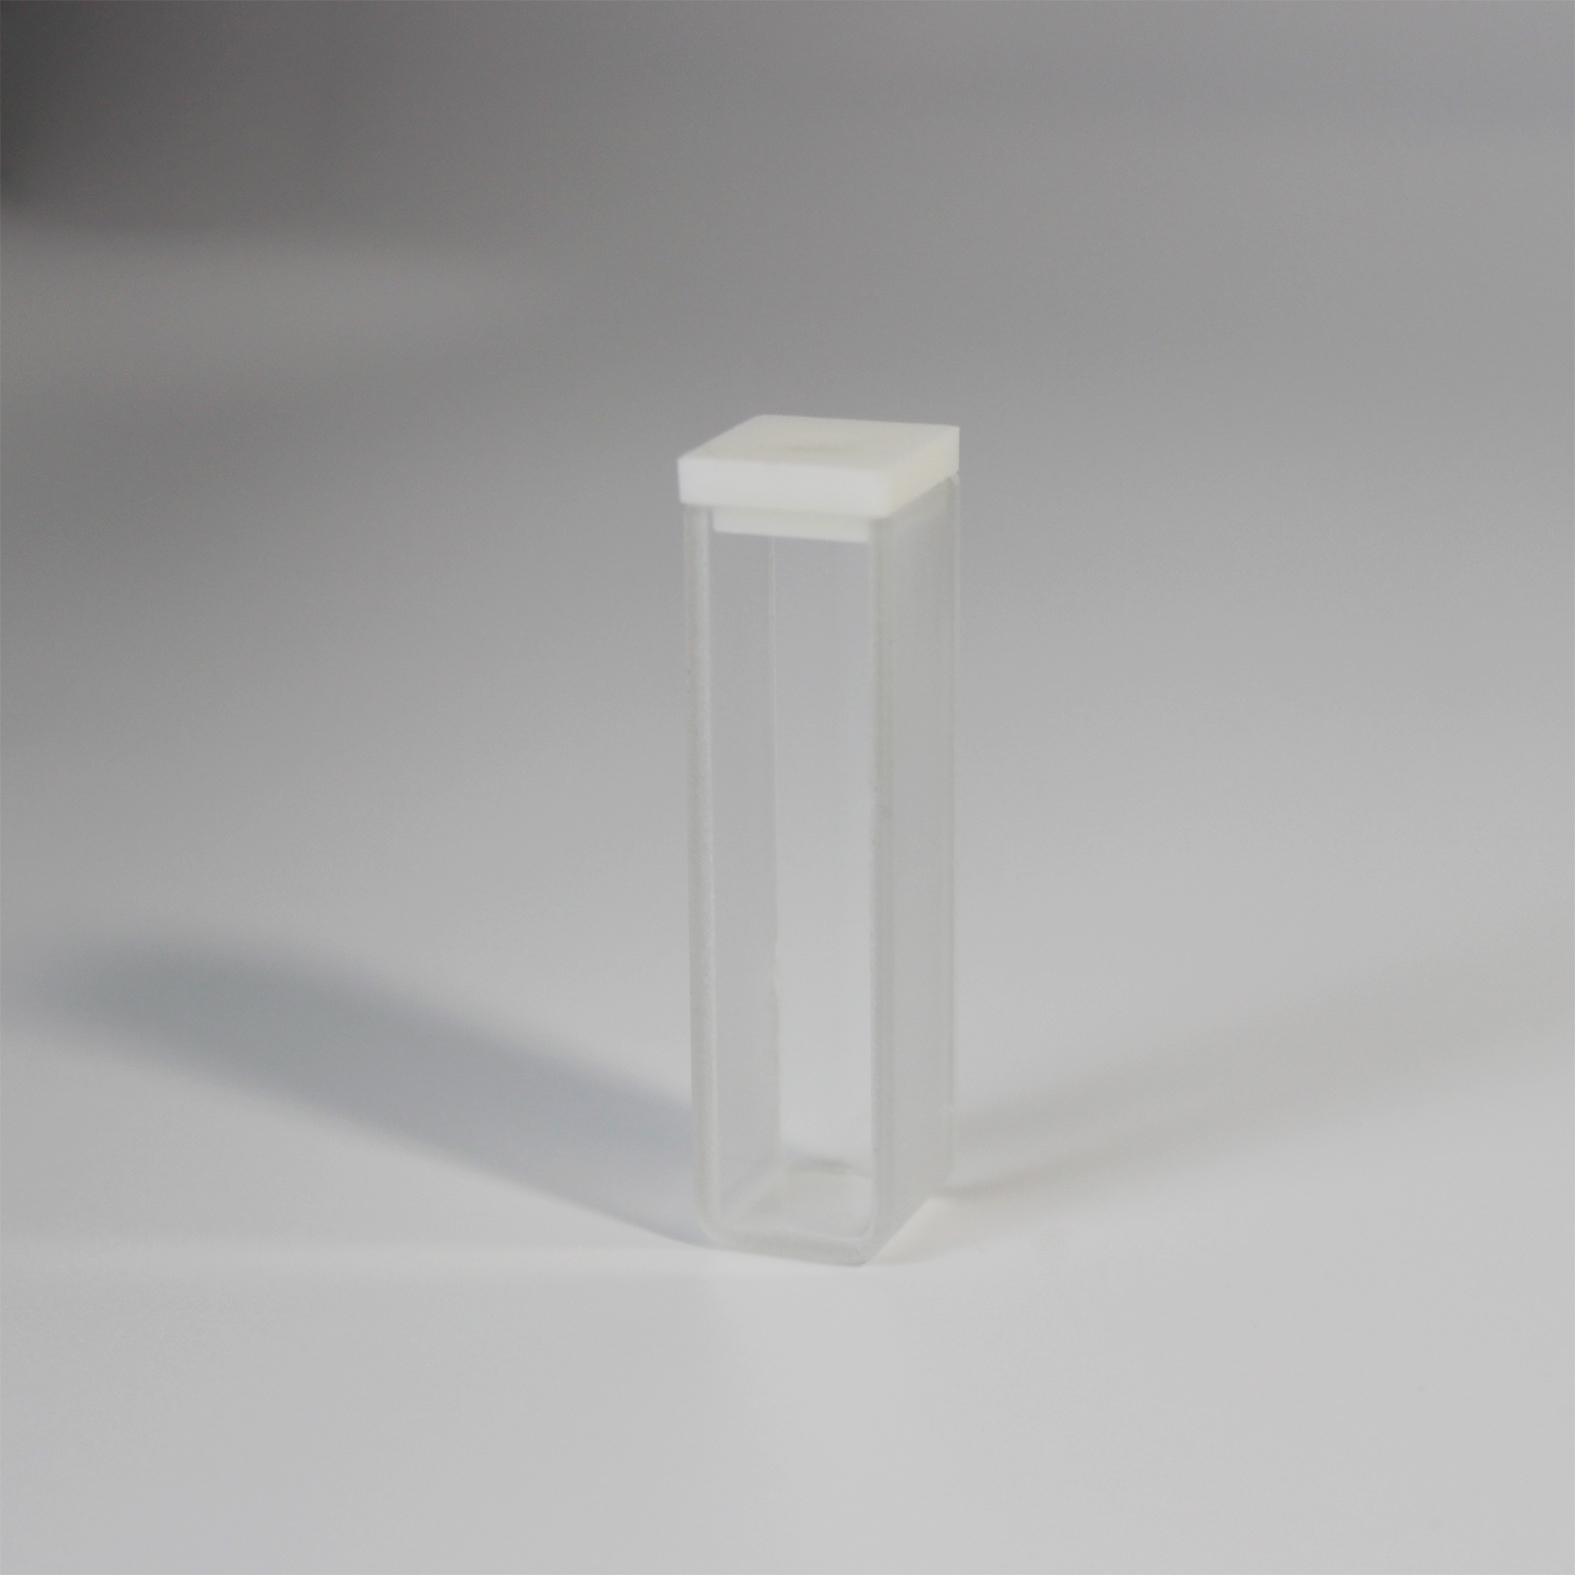 Chinese Manufacturer High Quality Laboratory Standard Quartz Glass Cuvettes for Spectrophotometers